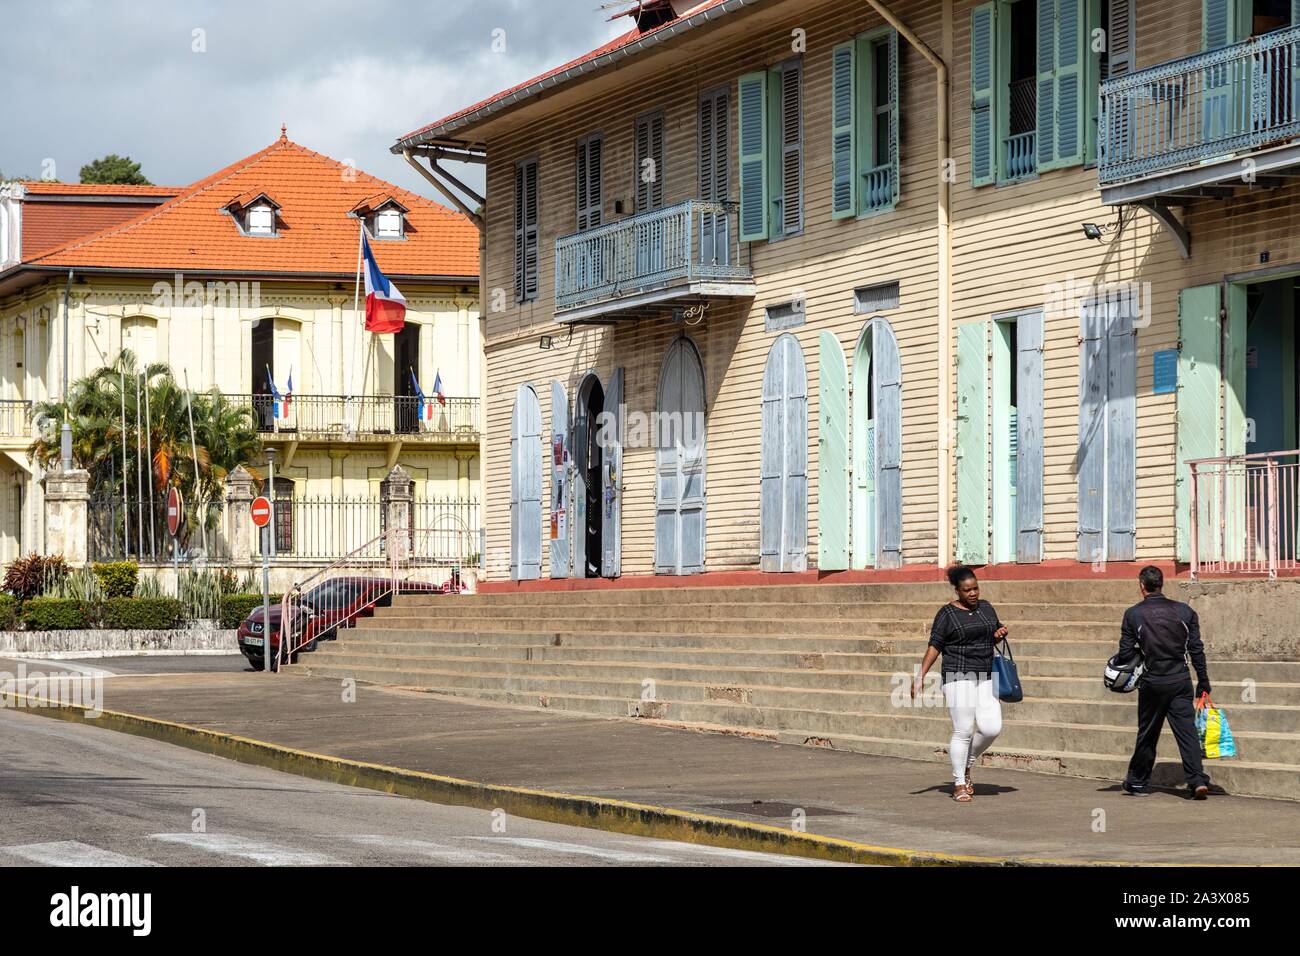 ALEXANDRE FRANCONIE MUSEUM, RUE REMIRE, Cayenne, Guiana francese, Dipartimento d'oltremare, SUD AMERICA, Francia Foto Stock